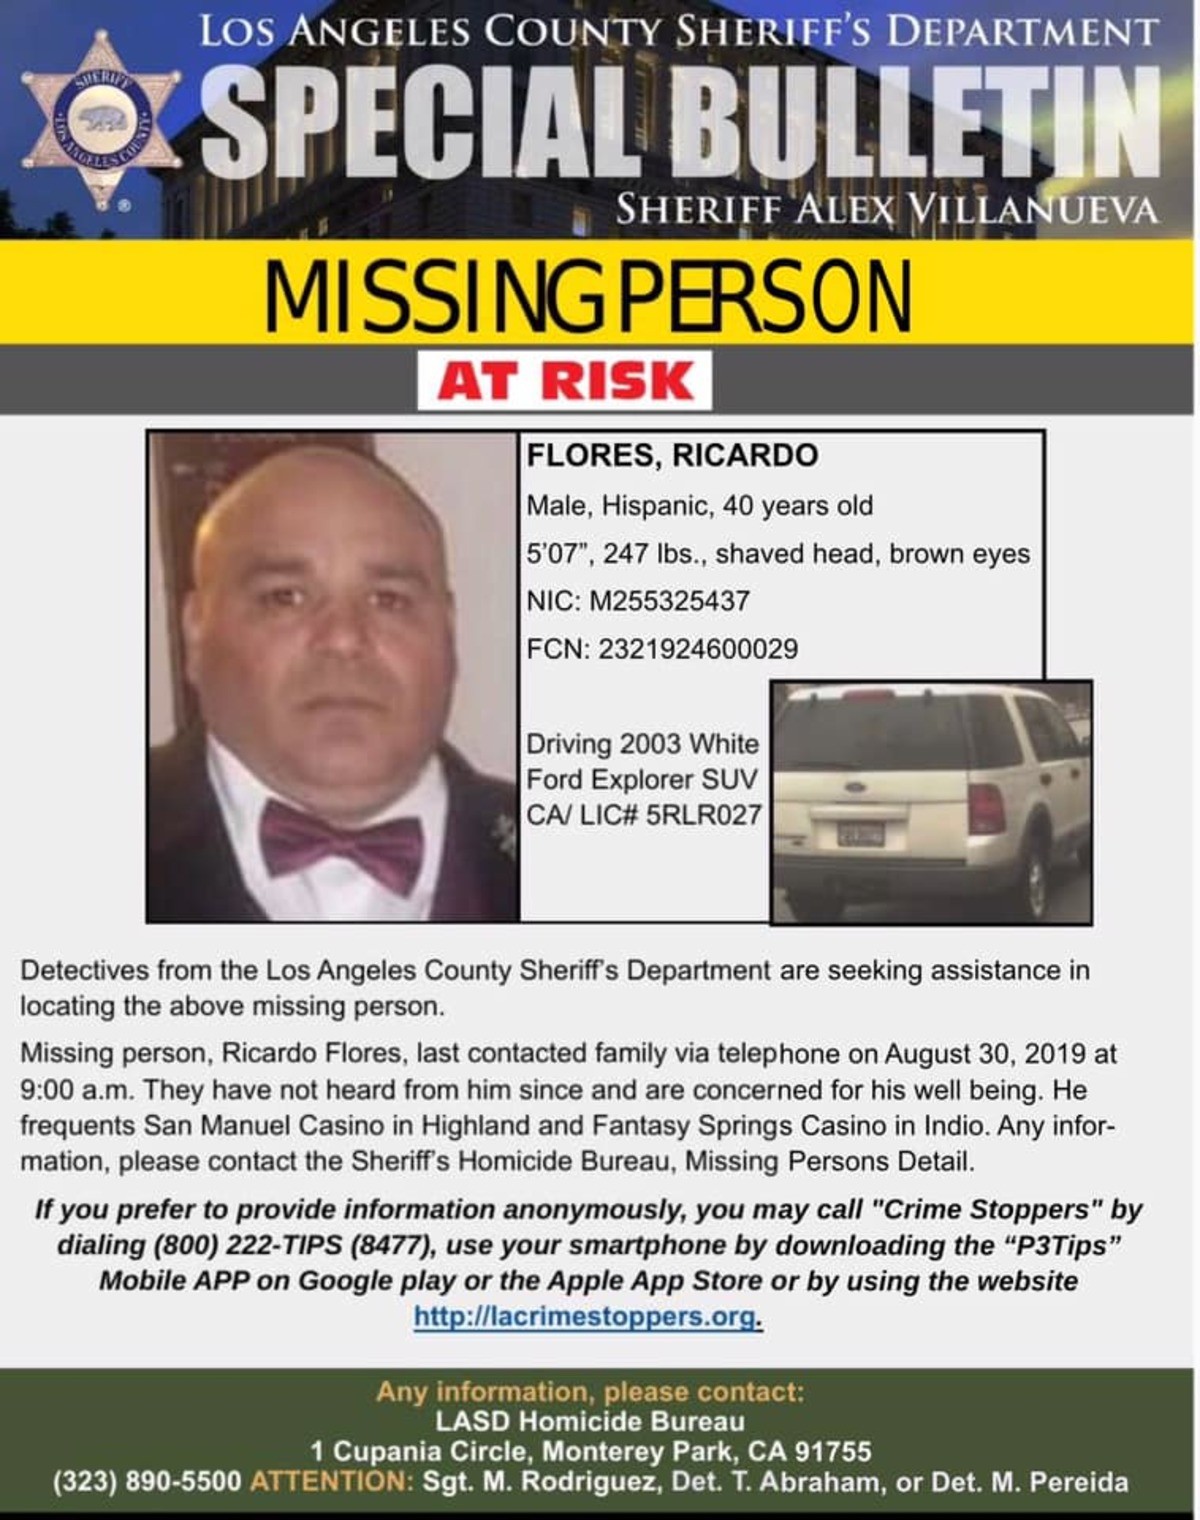 MISSING PERSON LOS ANGELES. No this is the Brother of my Cousin's wife in America, and he has been missing for 6 days with absolutely no contact to anyone since